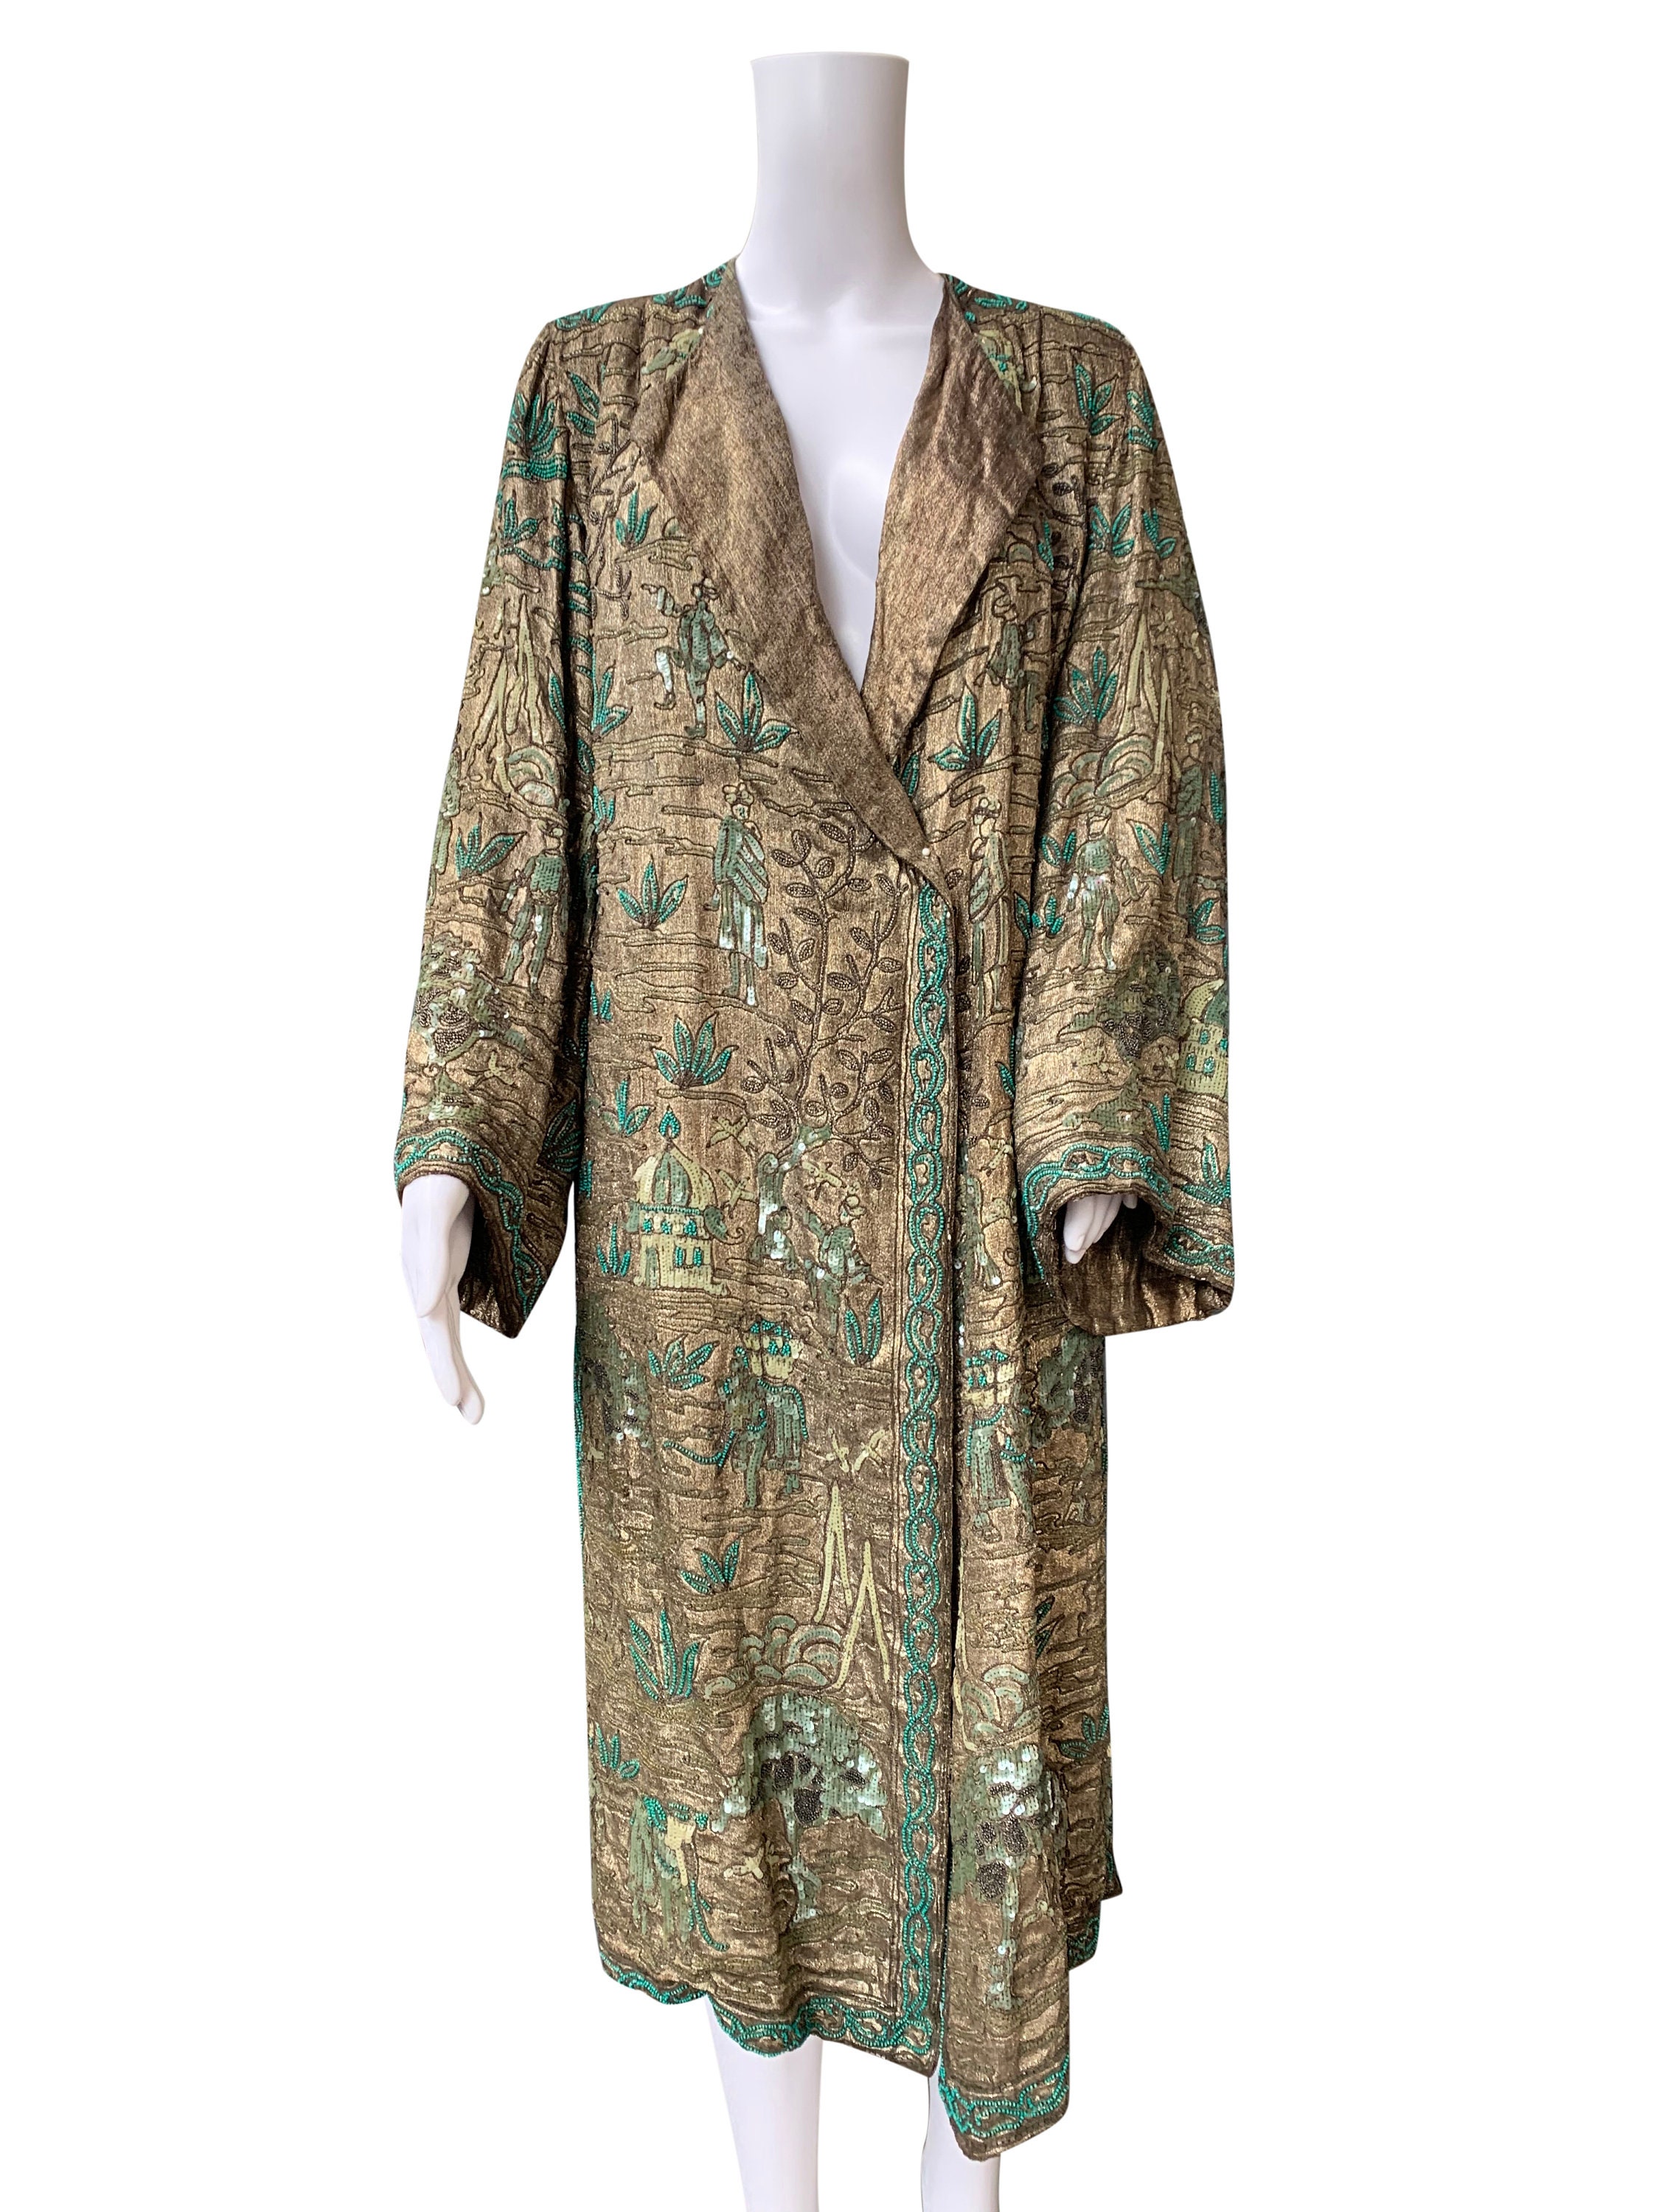 SOLD 1920s Beaded and Sequinned Lamé Coat Attributed to Premet - Etsy